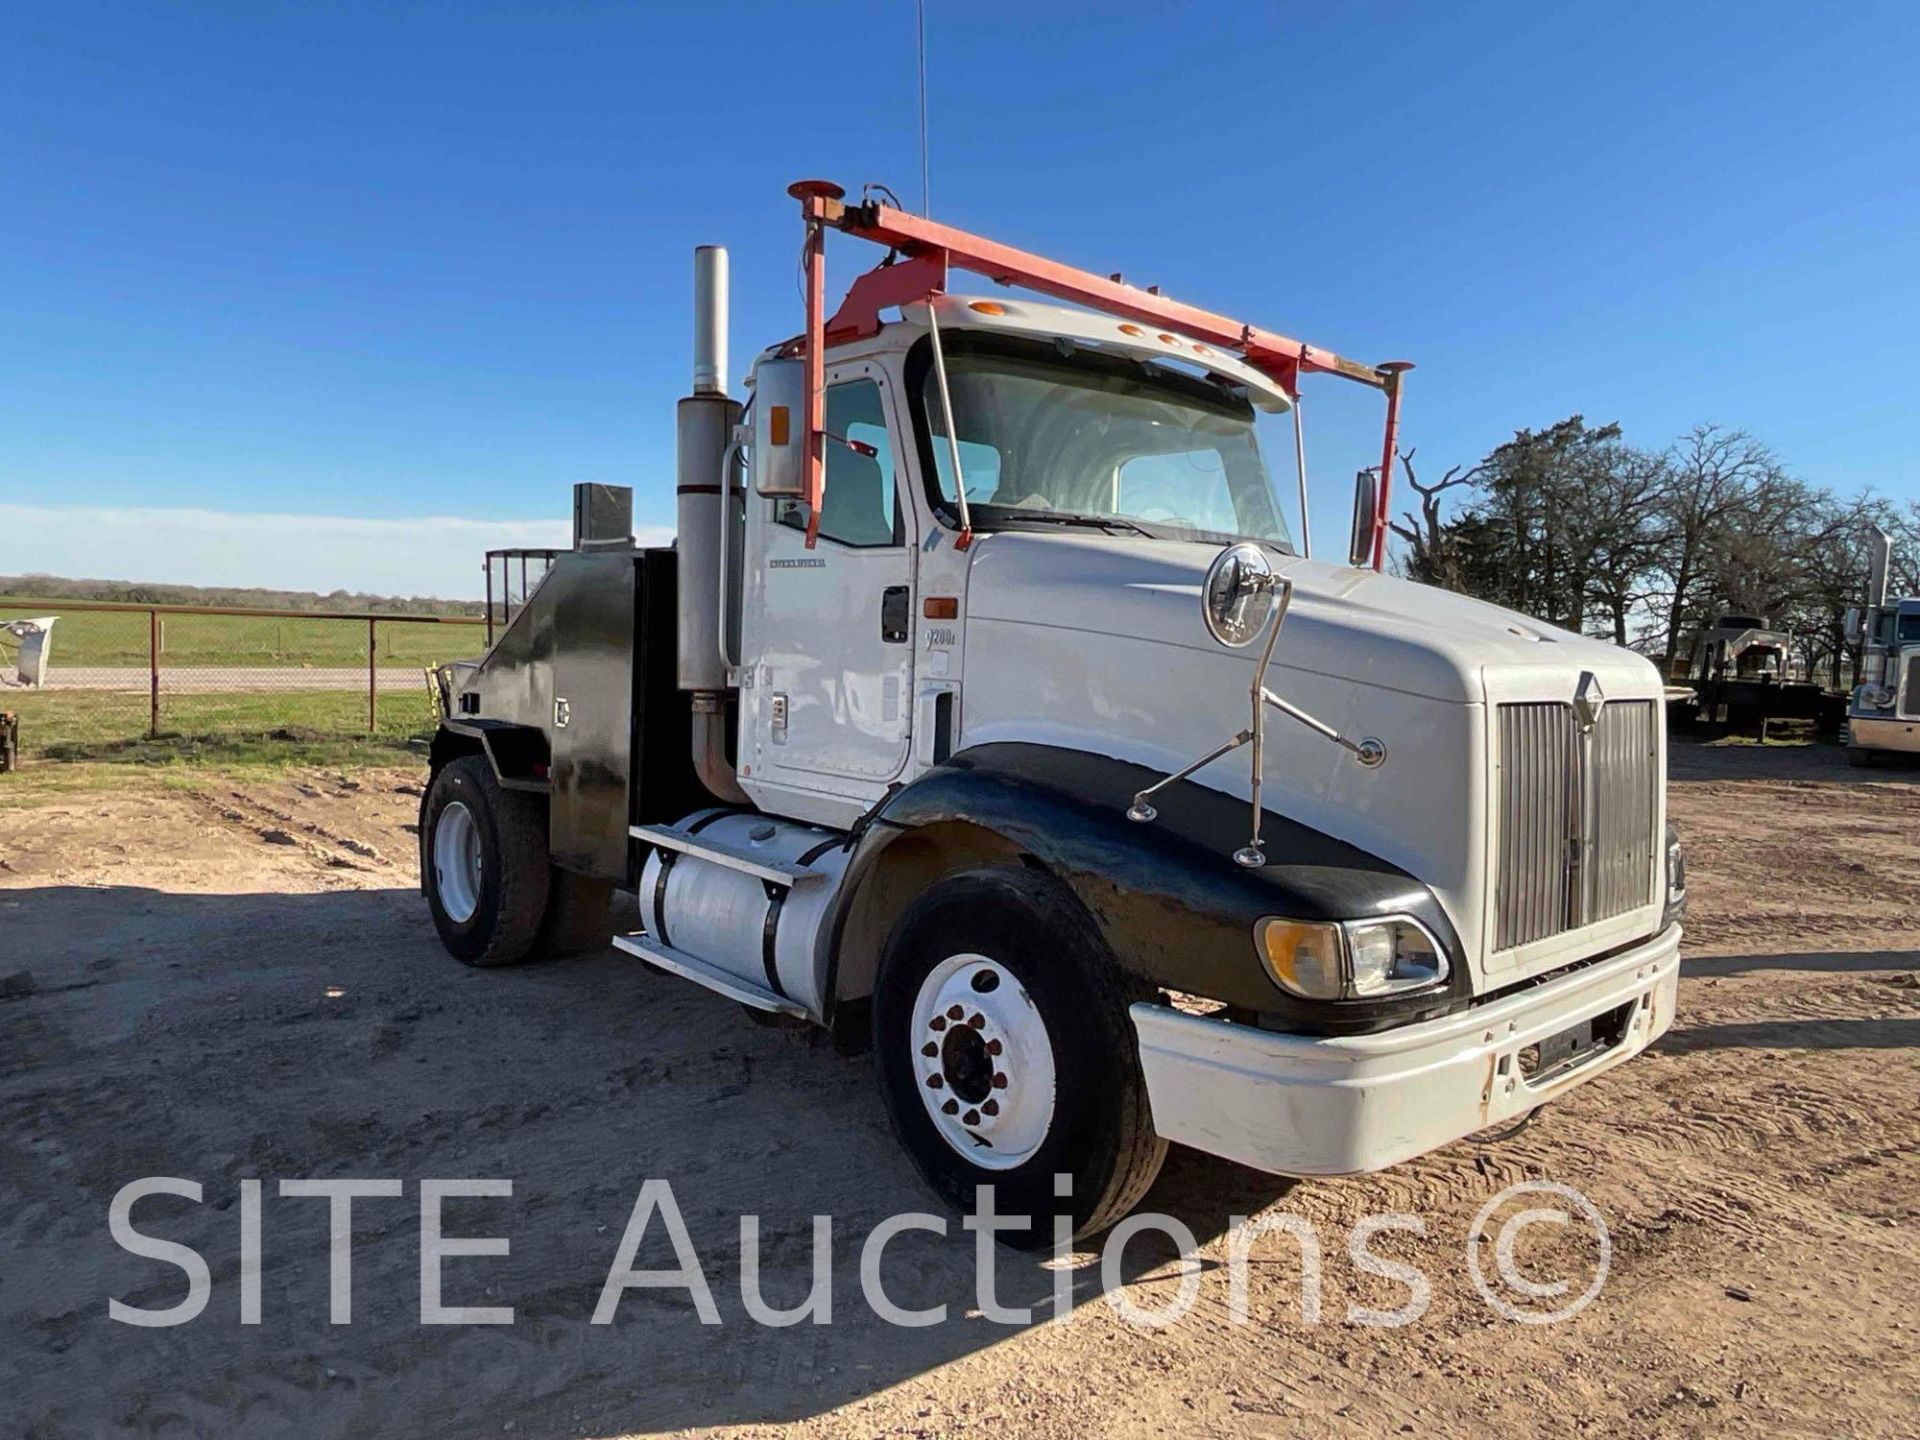 2007 International 9200i S/A Toter Truck - Image 2 of 27